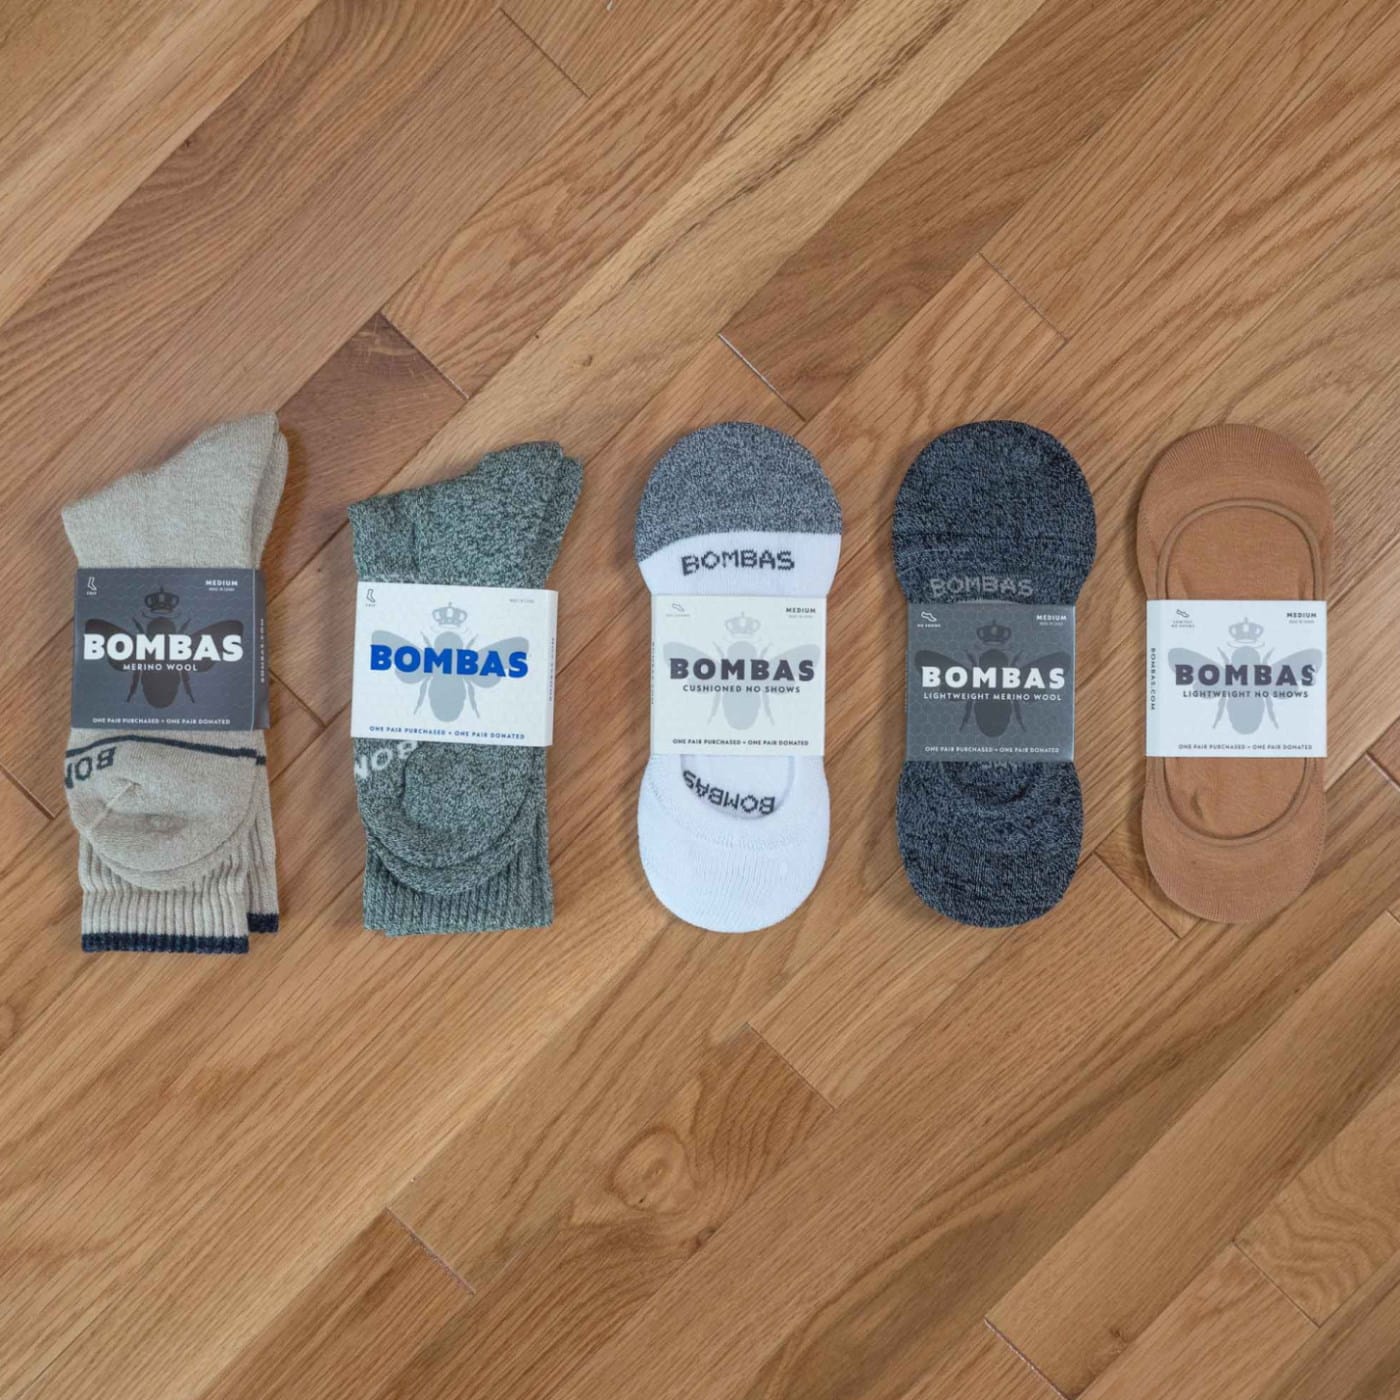 Why I've thrown away most of my Bombas socks